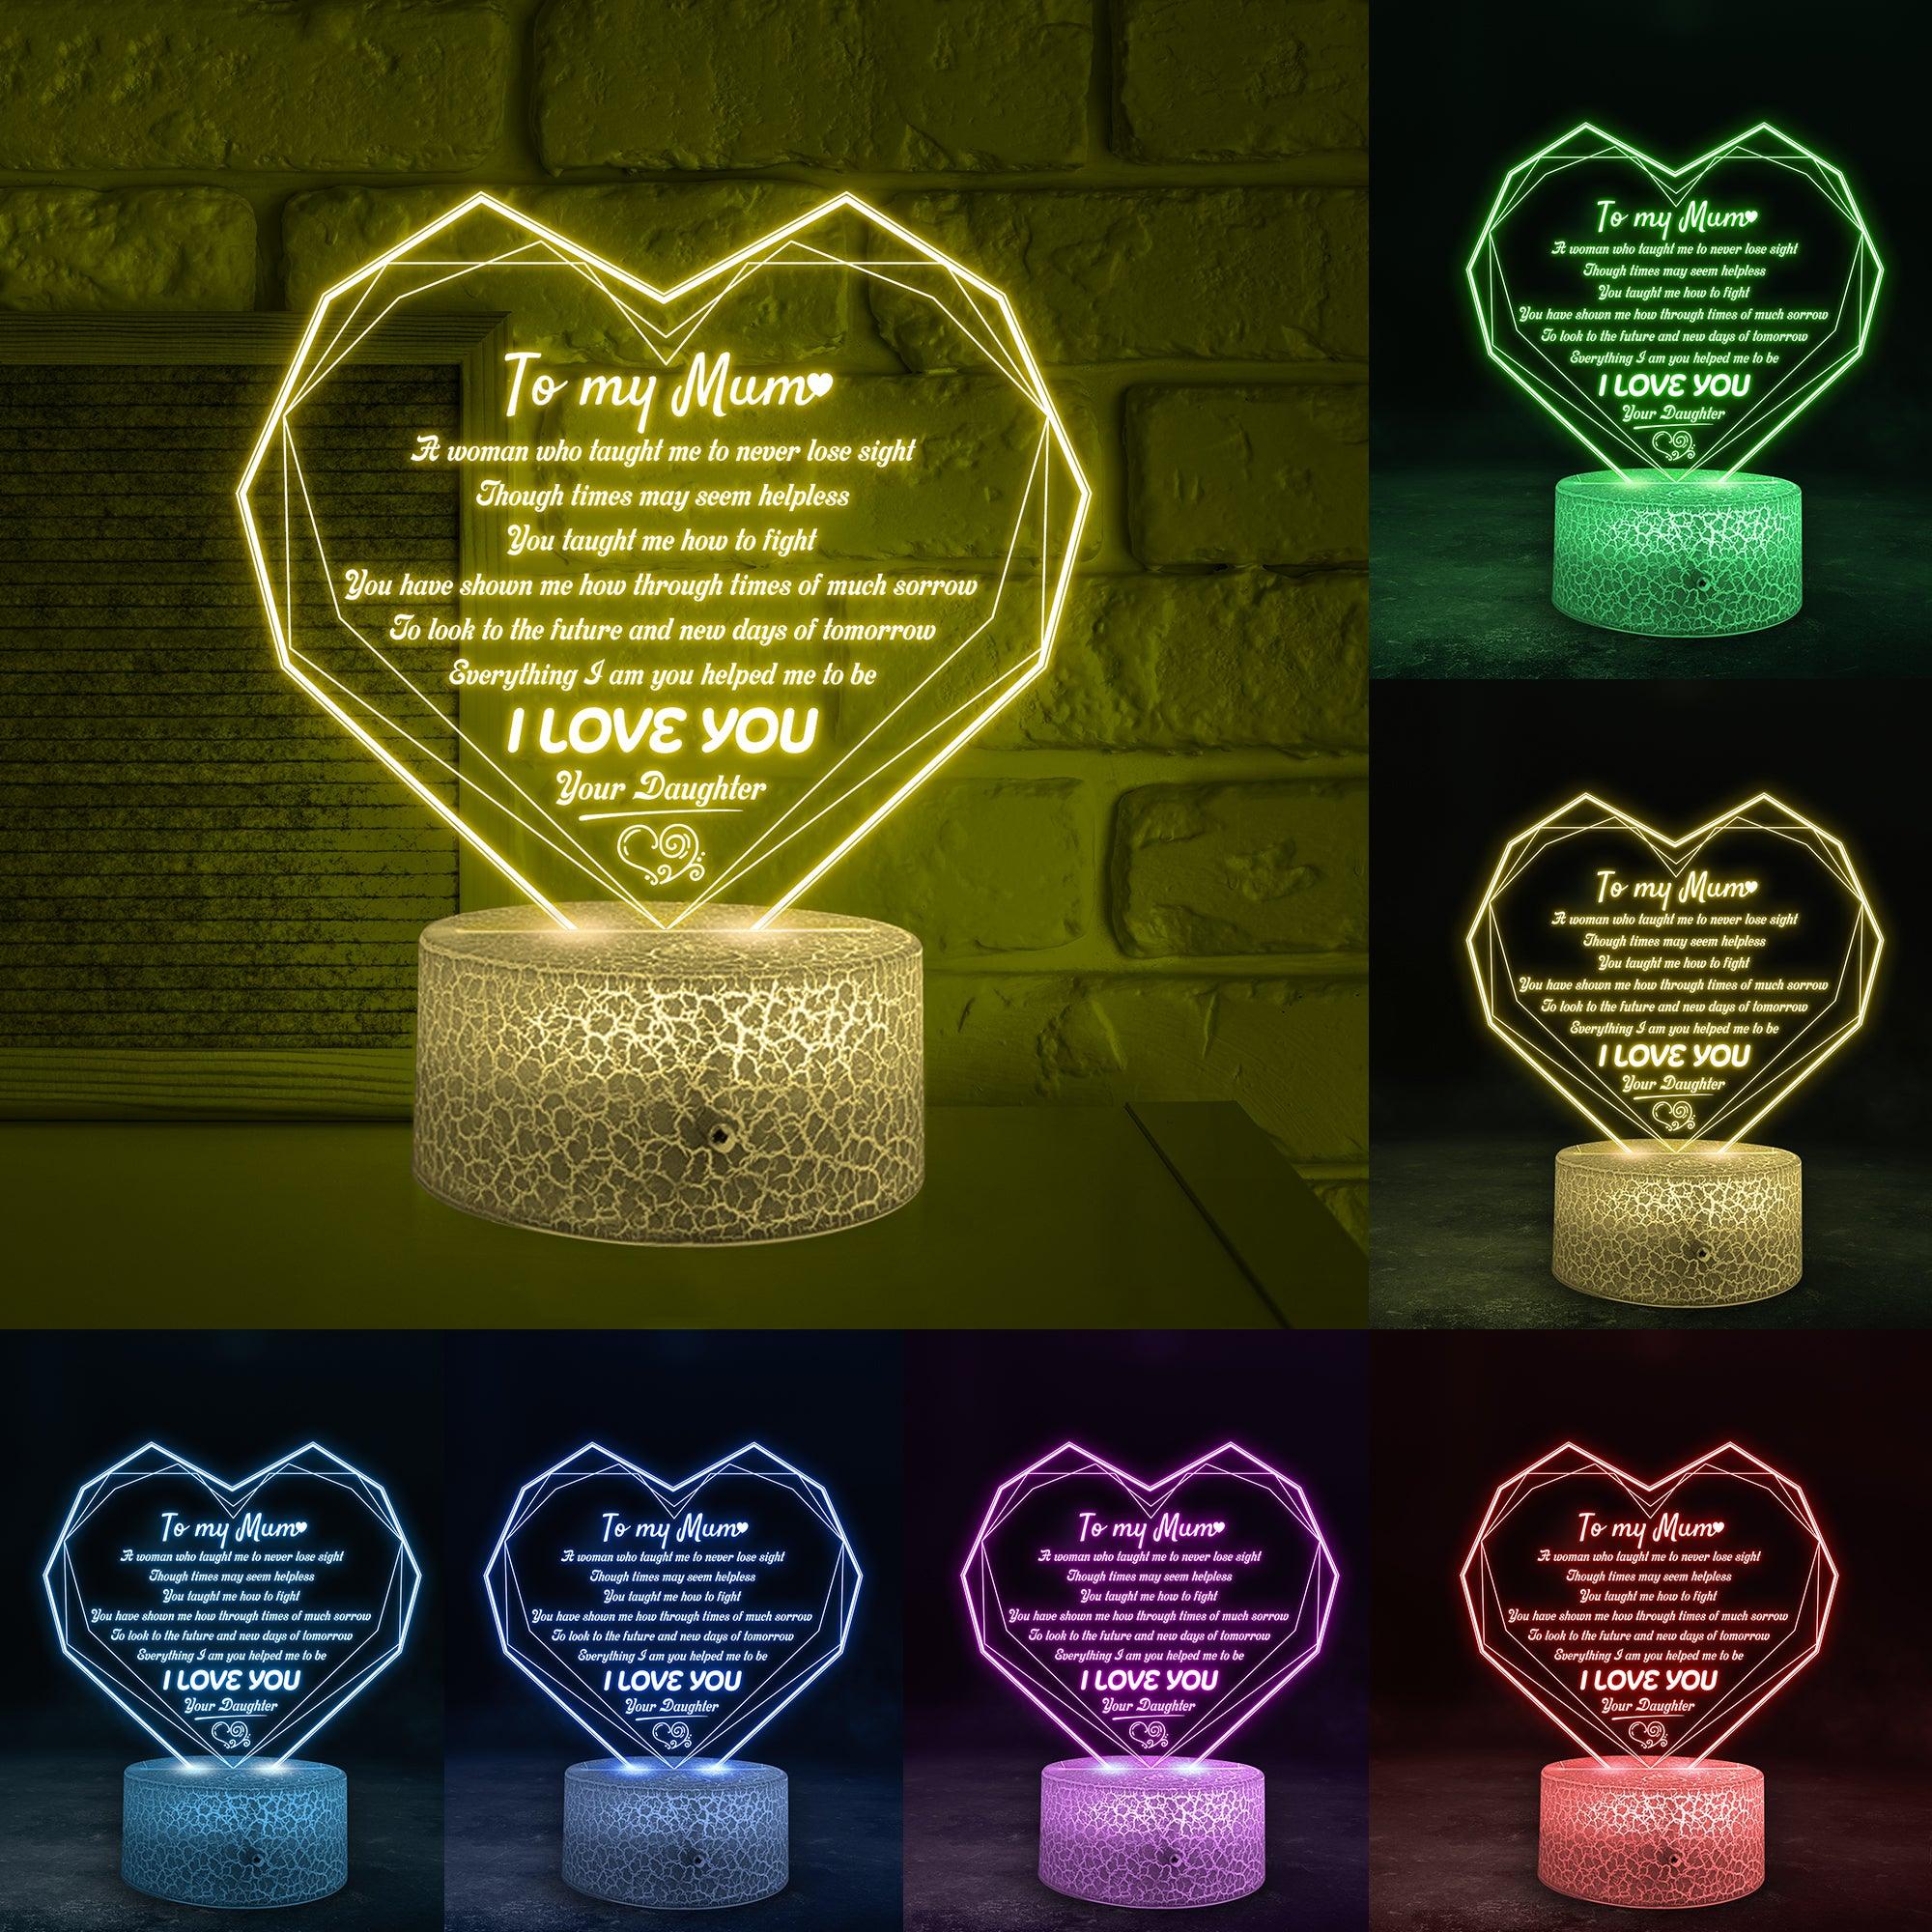 Heart Led Light - Family - From Daughter - To Mum - I Love You - Auglca19004 - Gifts Holder